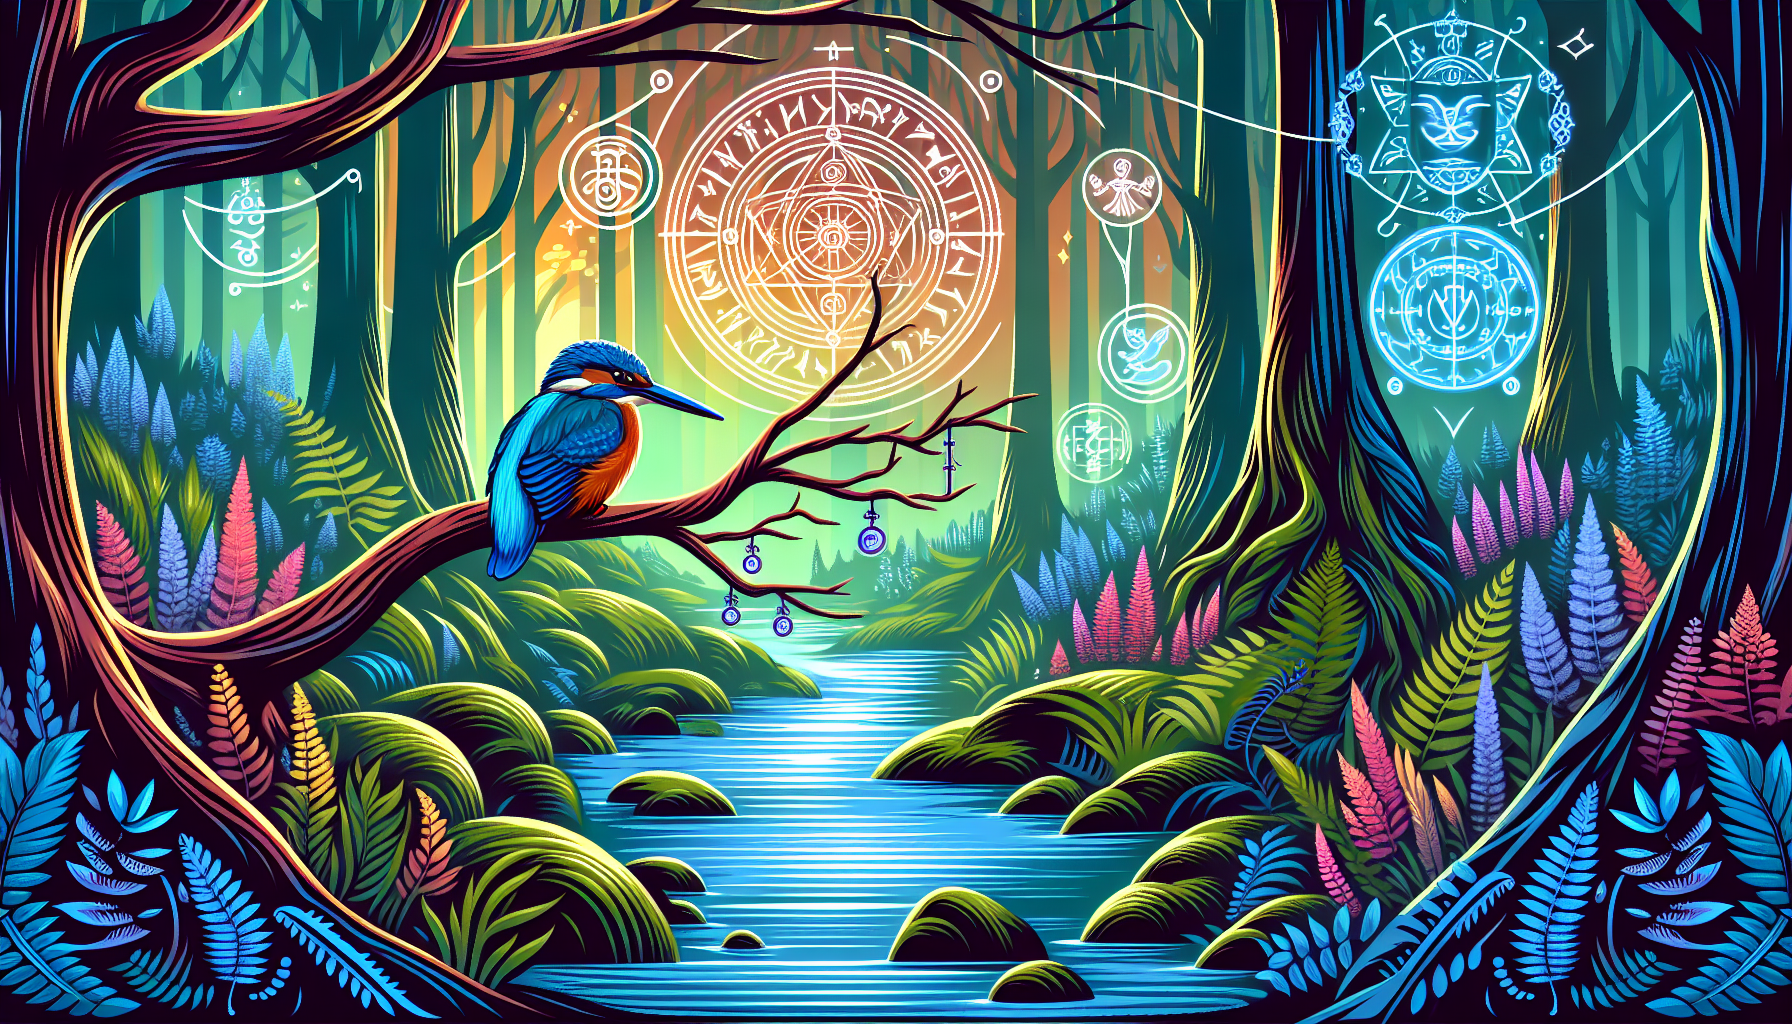 An artistic representation of a vibrant kingfisher perched on a branch overhanging a calm river, with a backdrop of a mystical forest illustrating various symbolic elements like ancient runes and subt